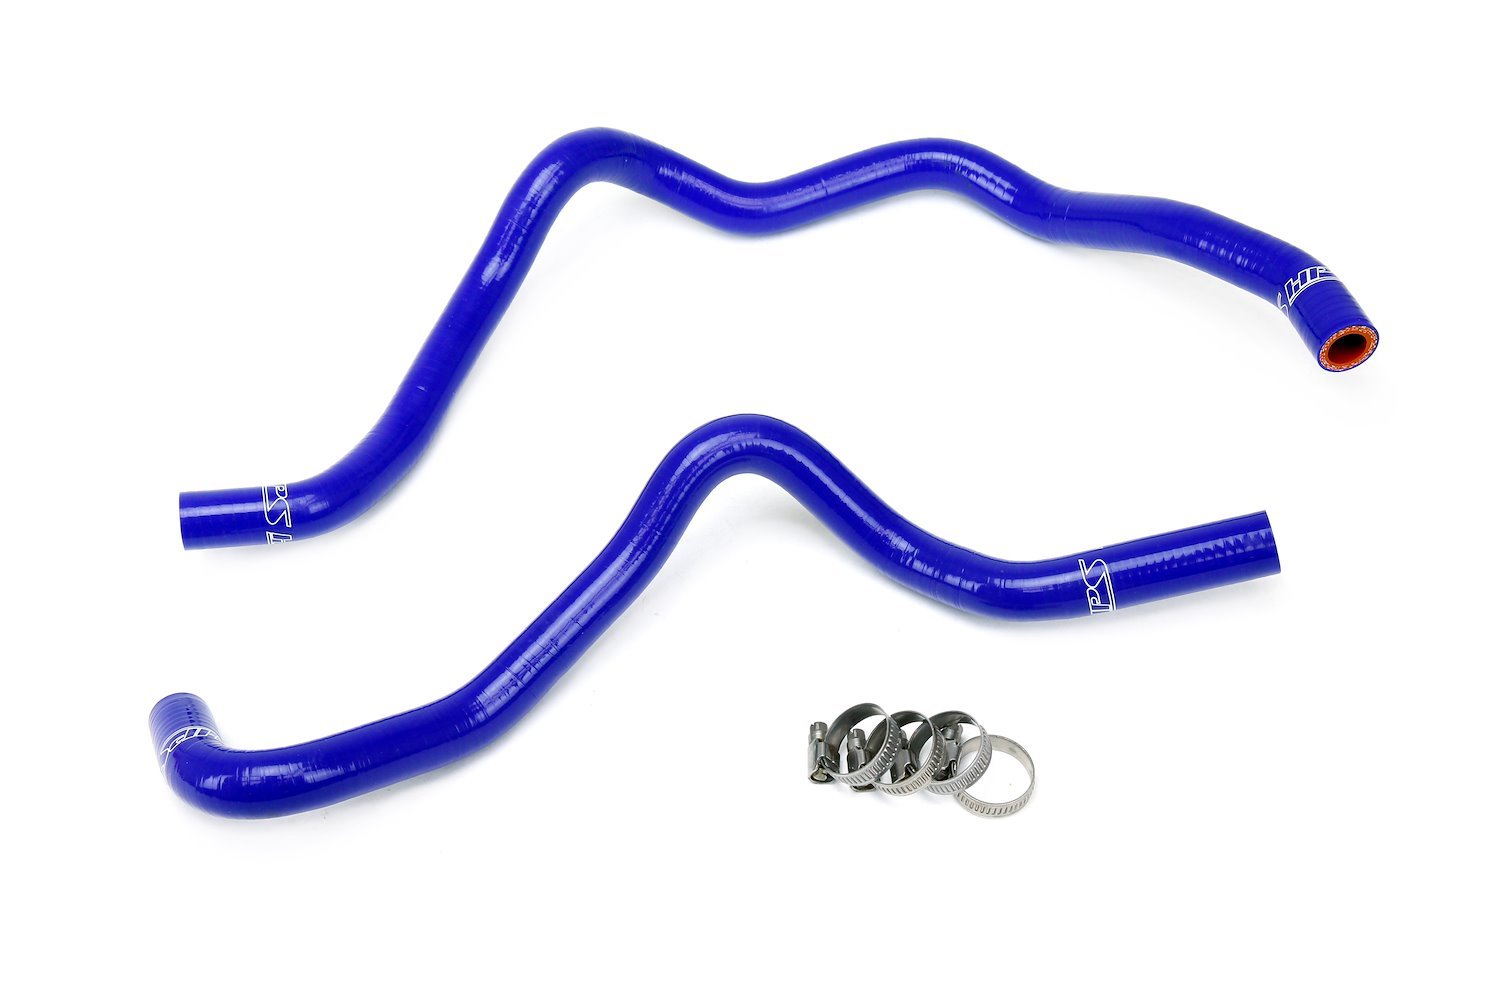 57-1849-BLUE Silicone Coolant Hose Kit, 3-Ply Reinforced Silicone, Replaces Factory Rubber Heater Hoses